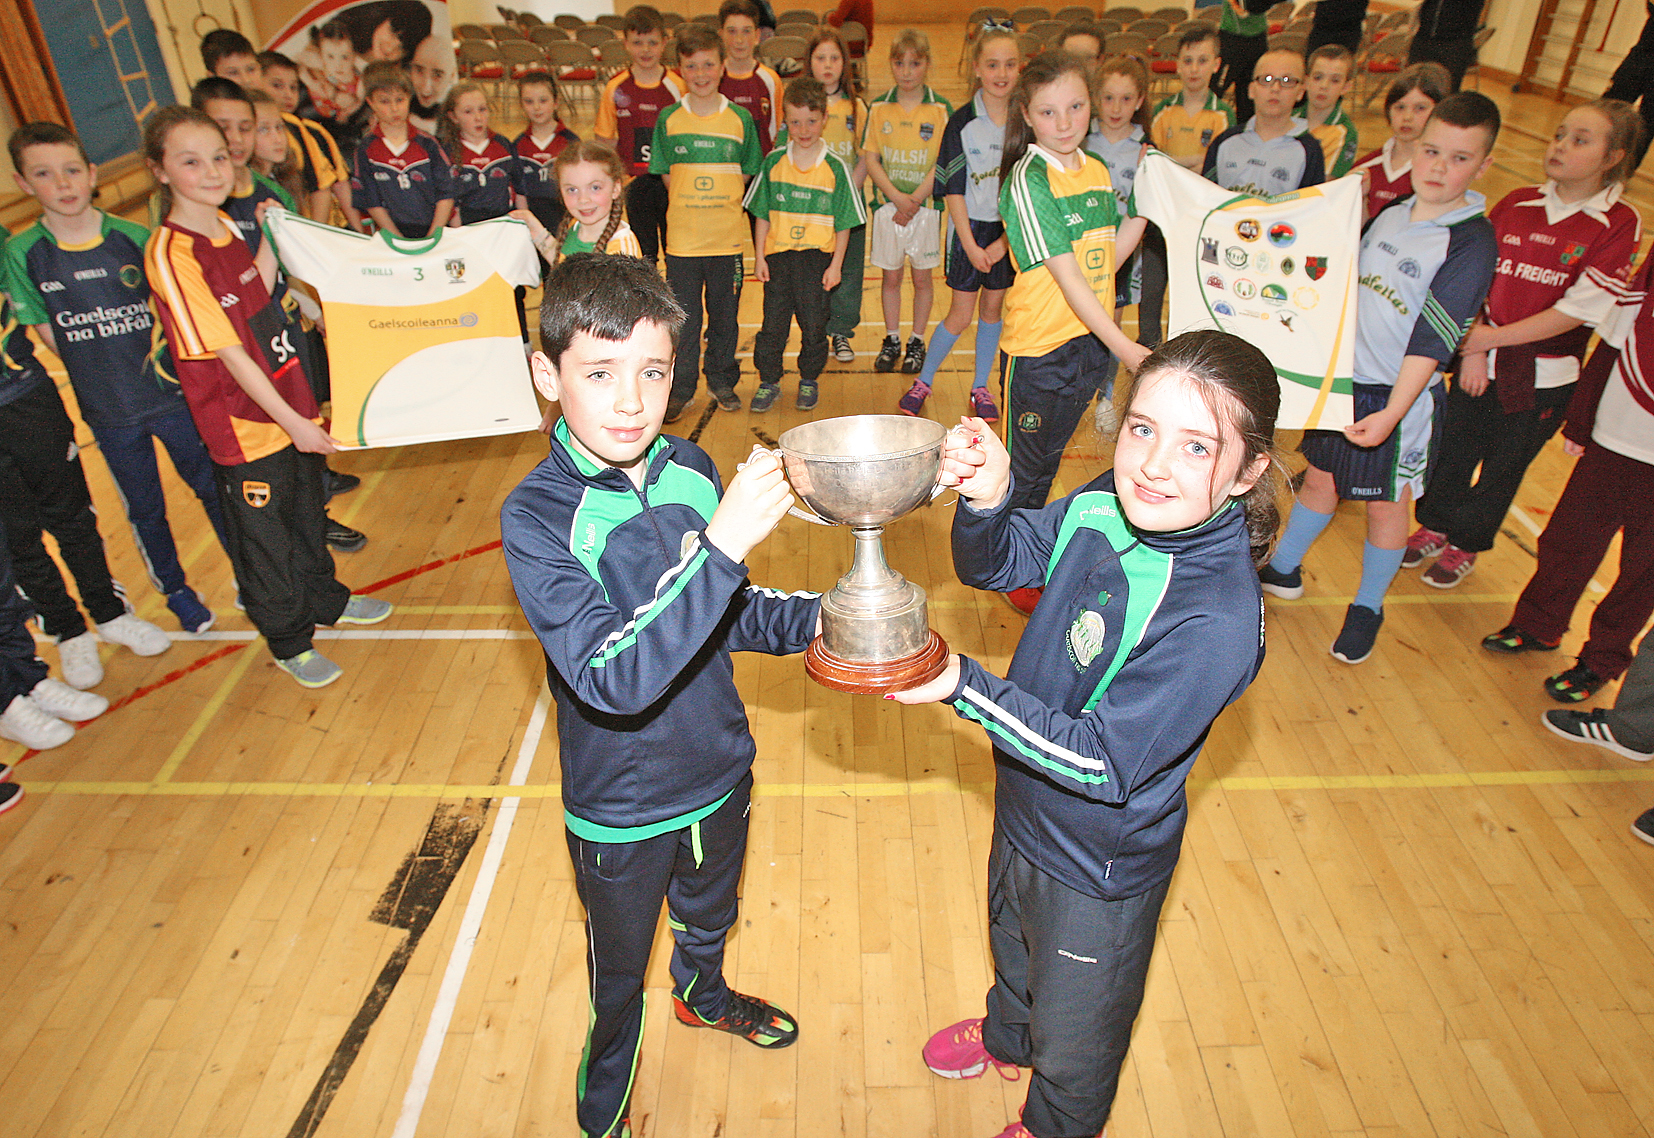 PROUD: Launch of the Liam Murray Cup in Coláiste Feirste with Liam and Amy Murray along with pupils from Irish schools who are competing in the tournament